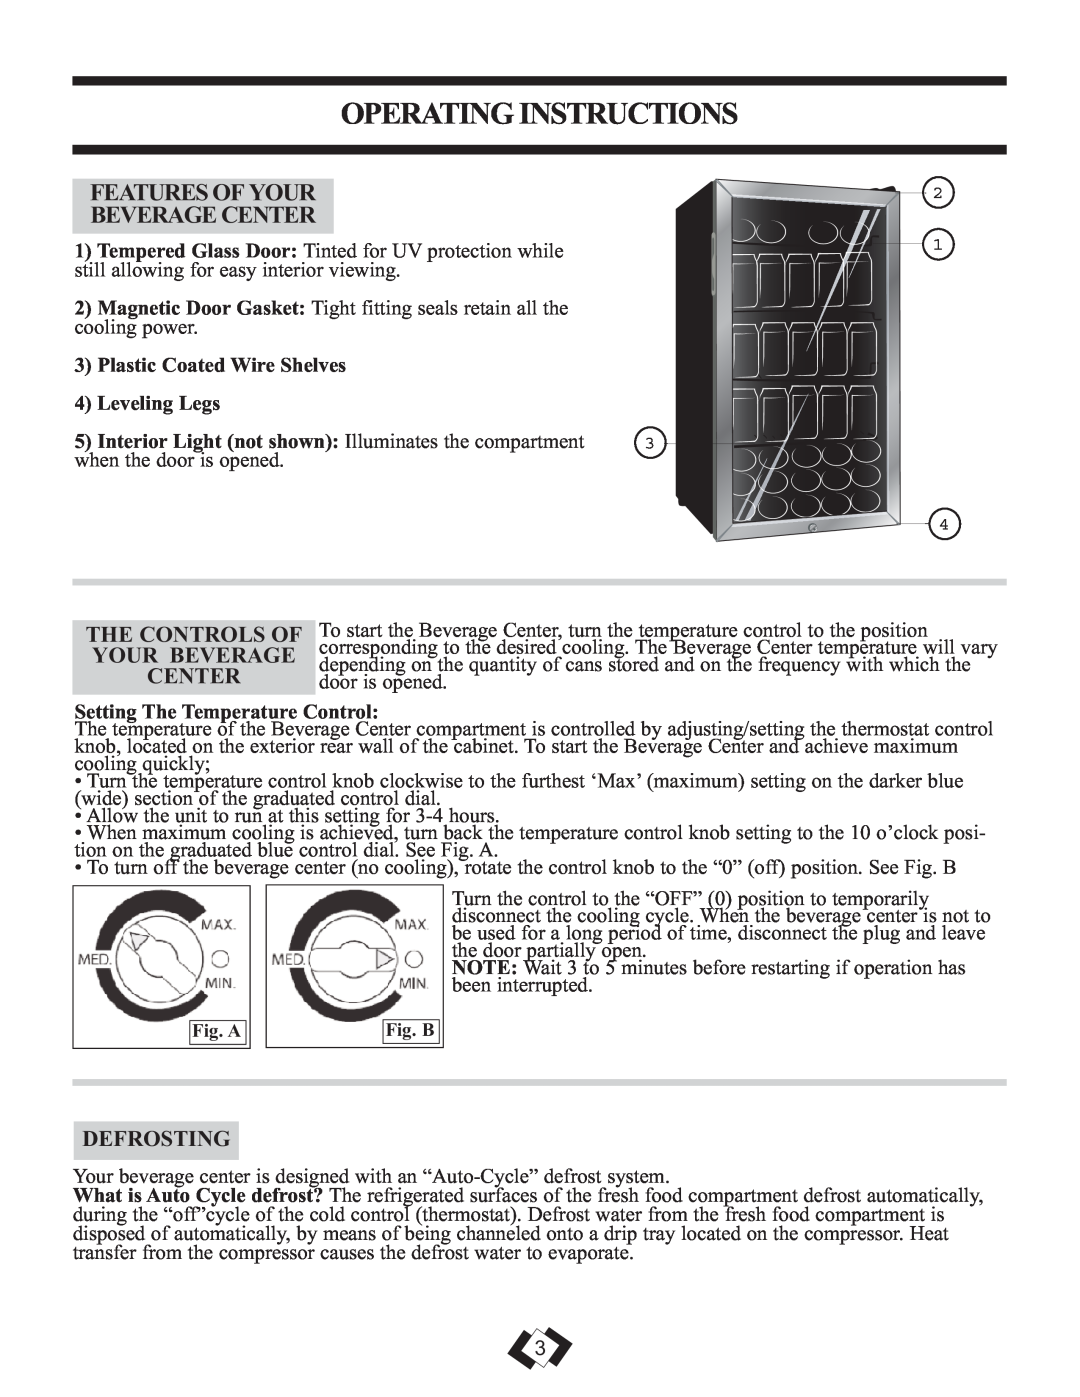 Danby DBC120BLS Operating Instructions, Features Of Your Beverage Center, The Controls Of Your Beverage Center, Defrosting 